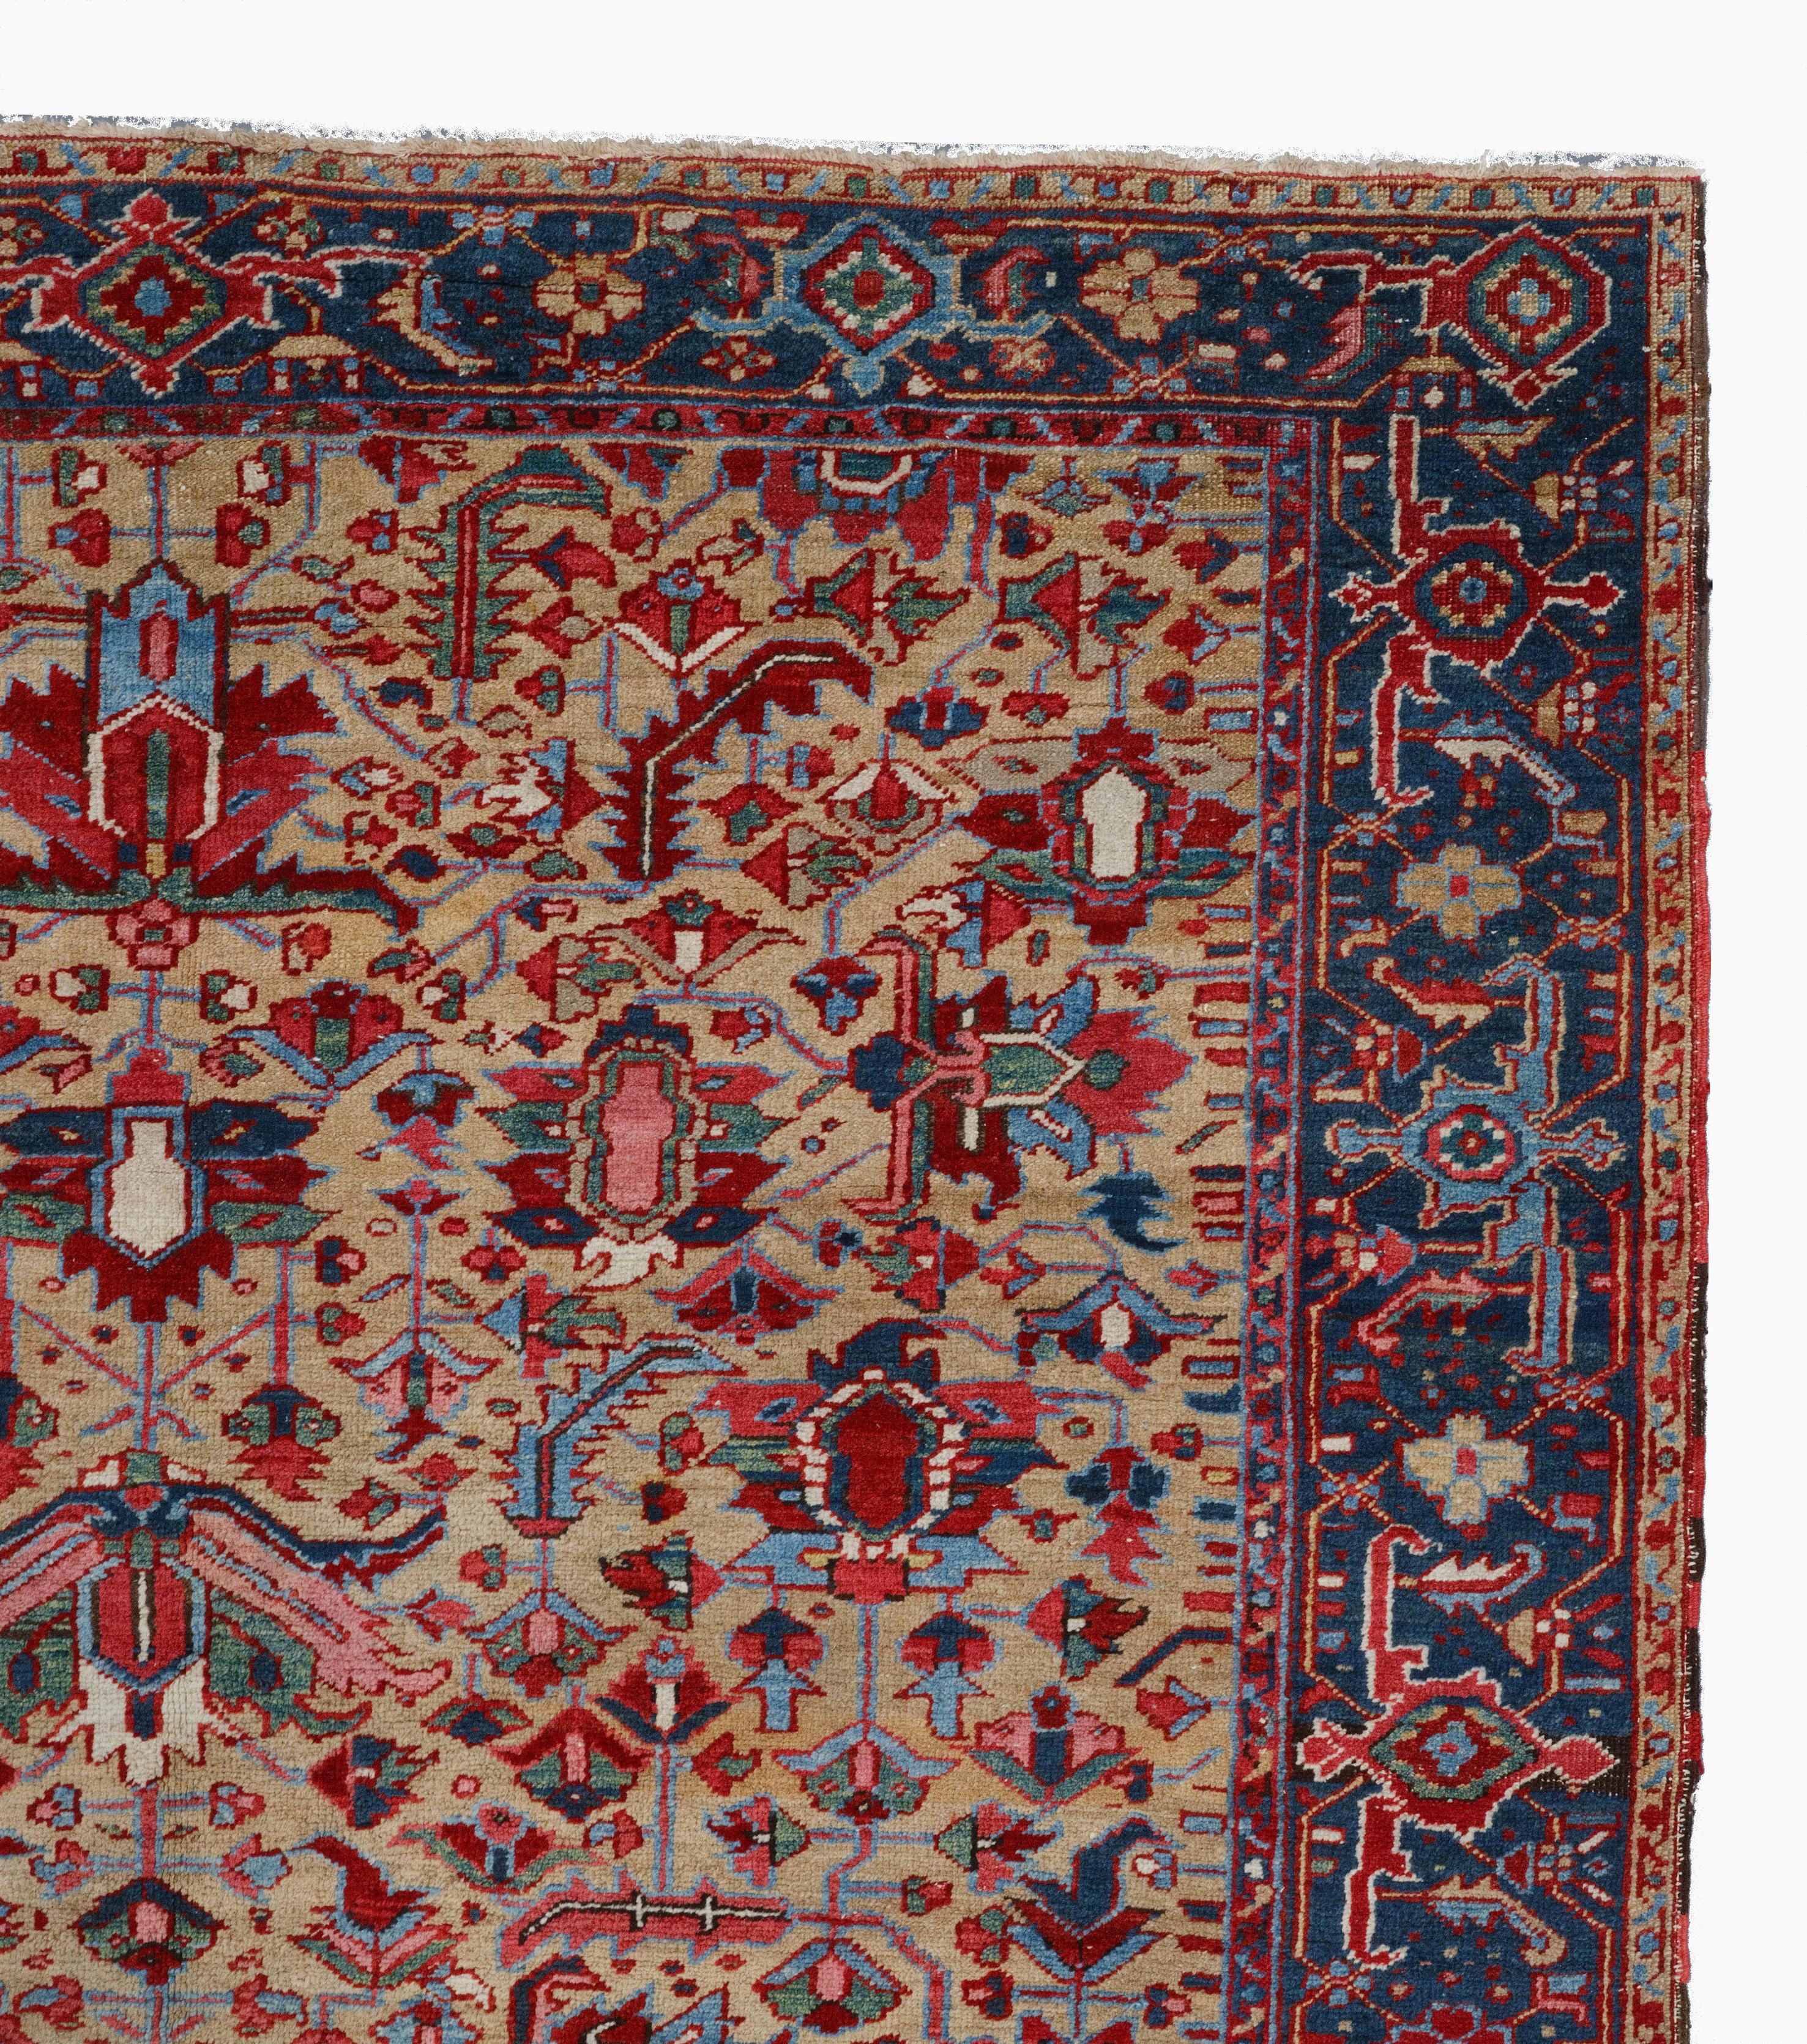 A Timeless Elegance: Antique Heriz Carpet from the 19th Century
Size 203 x 273 cm

If you want to add timeless elegance to your home or office, this antique Heriz rug from the 19th century is for you. The colors and patterns of the carpet reflect